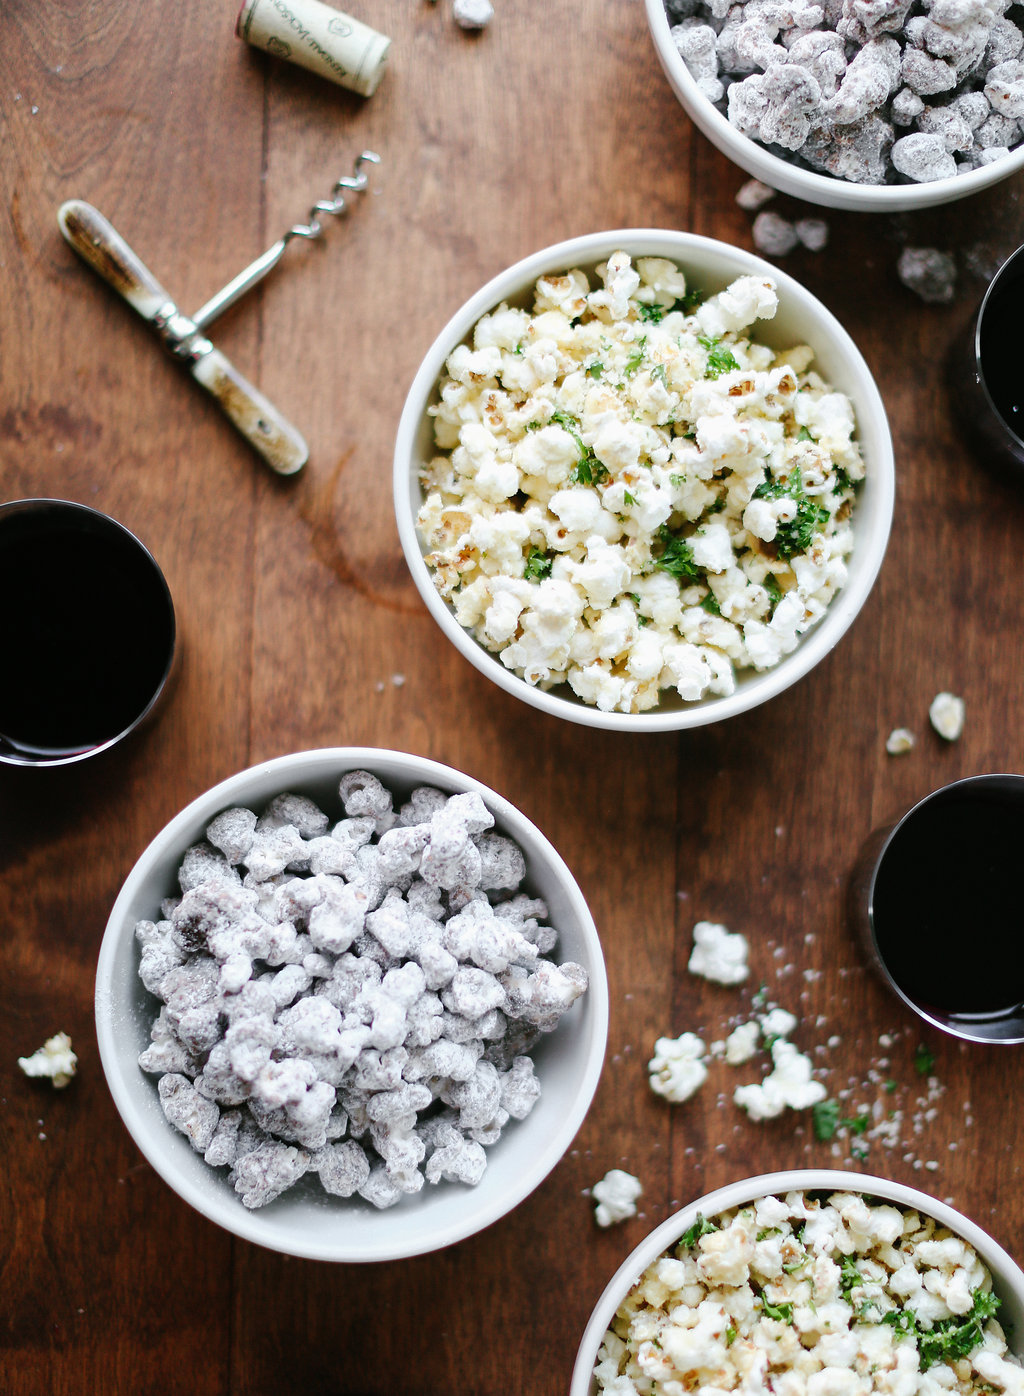 Two fantastic variations of classic popcorn - Parmesan & Parsley and Puppy Chow! #recipe